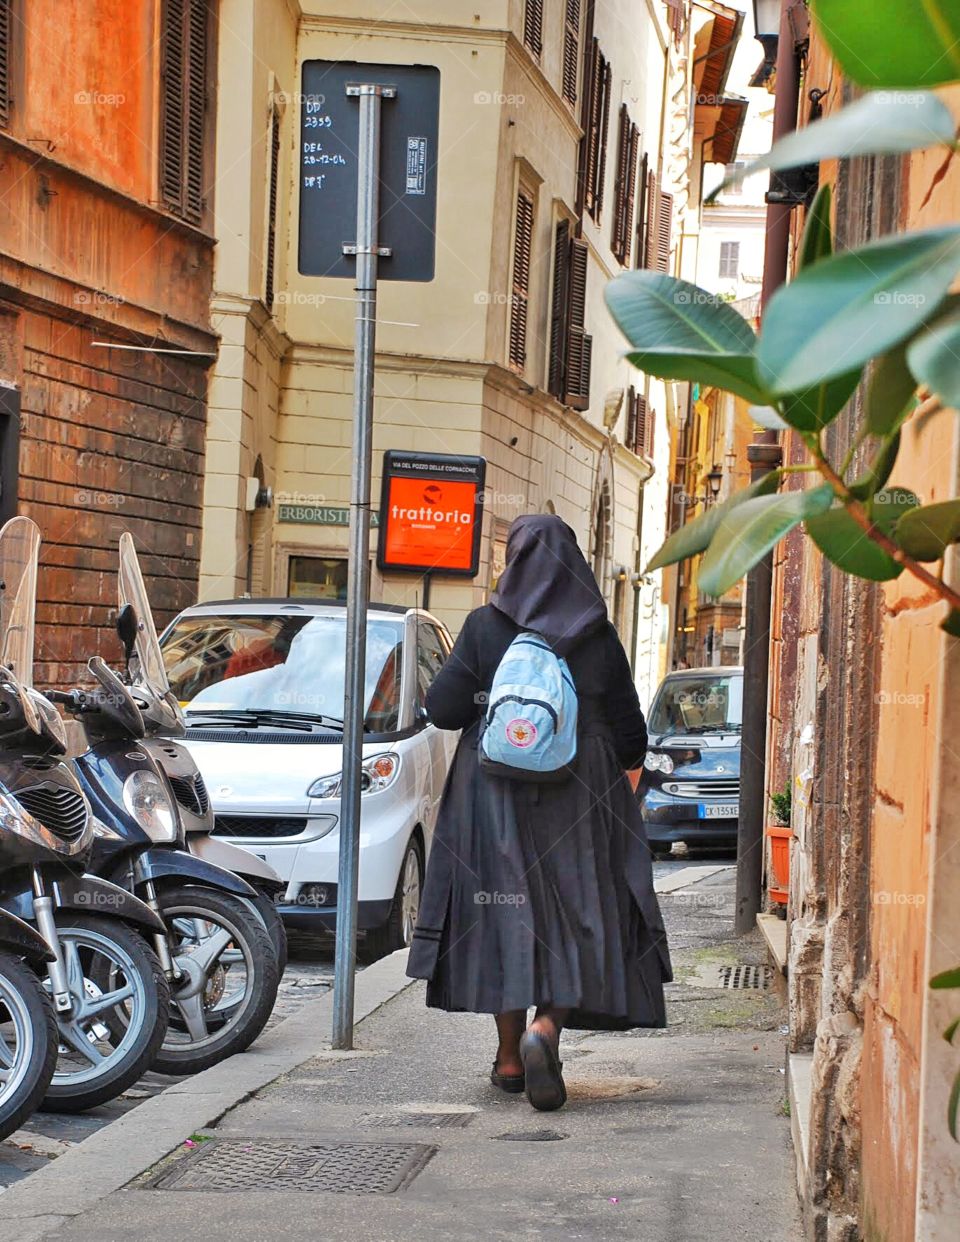 Nun on the run. A nun with a backpack walks down a Roman street lined with motorcycles